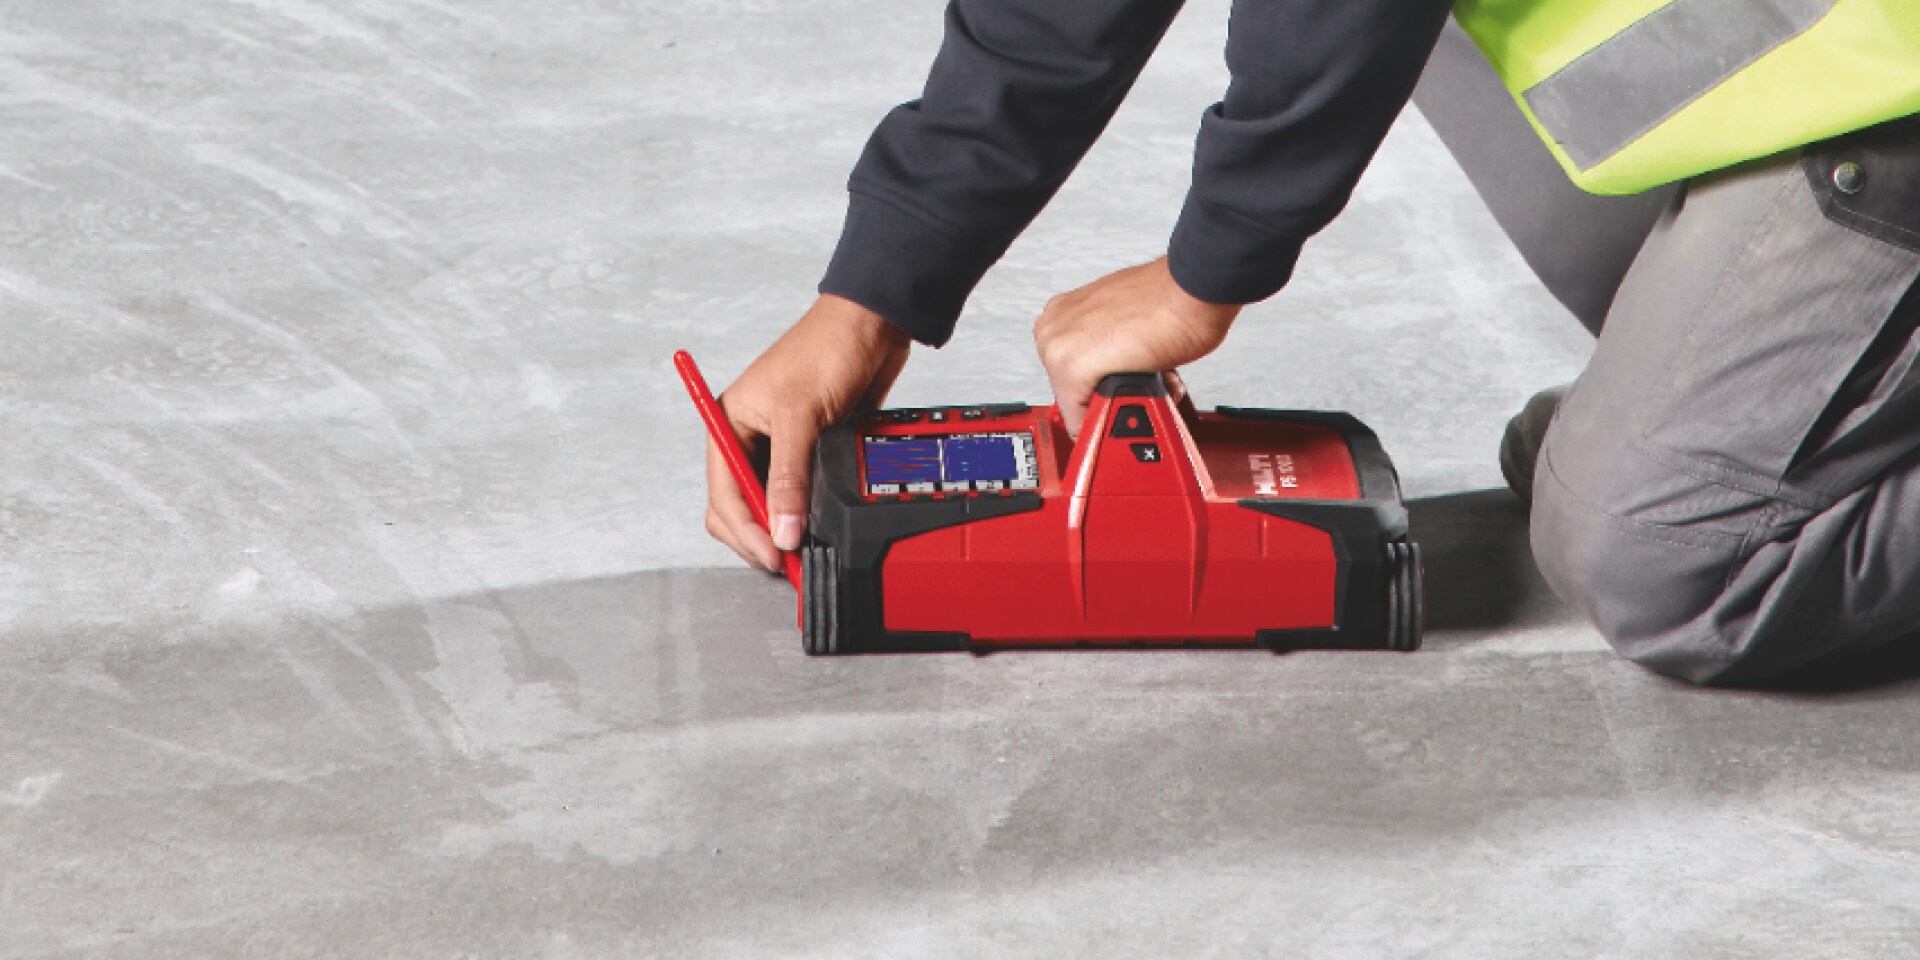 Hilti detection systems